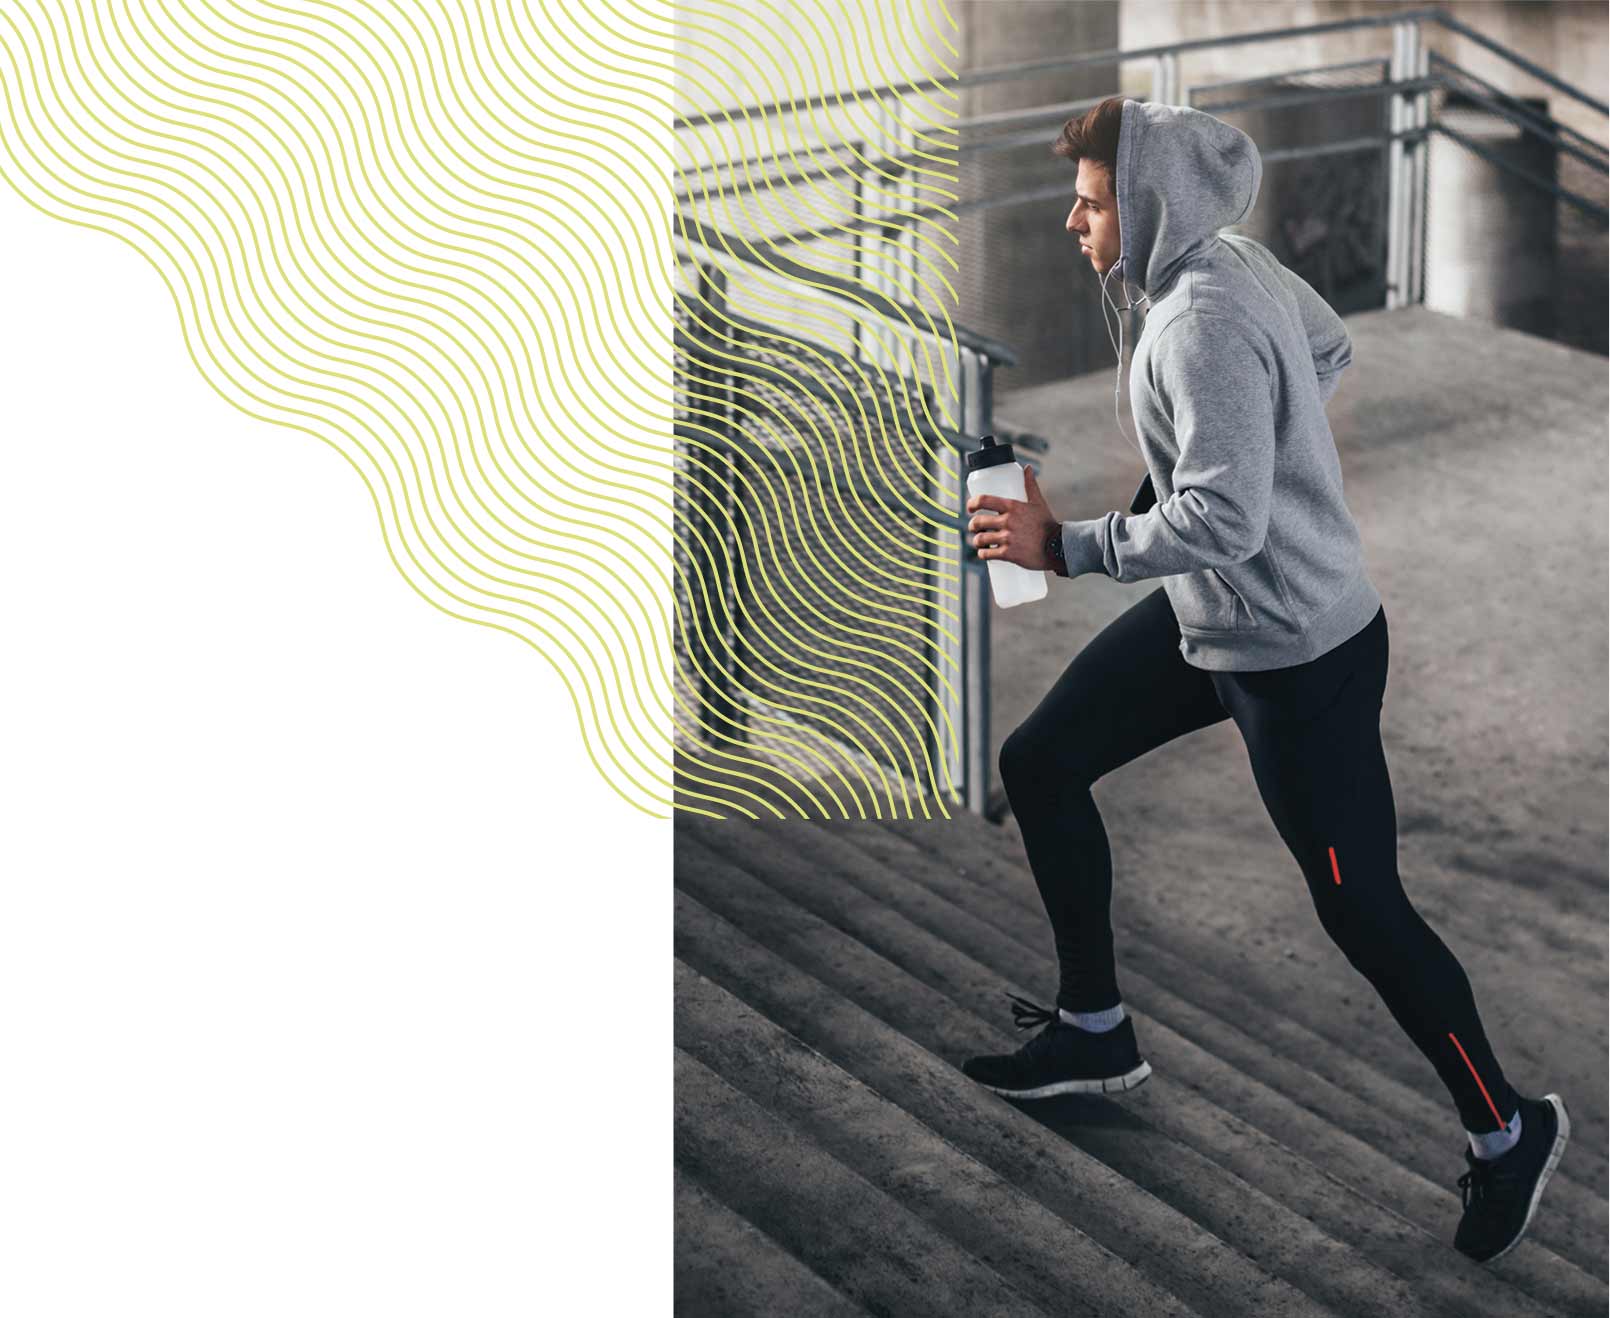 A custom graphic shape overlapping with an image of a person running up steps.